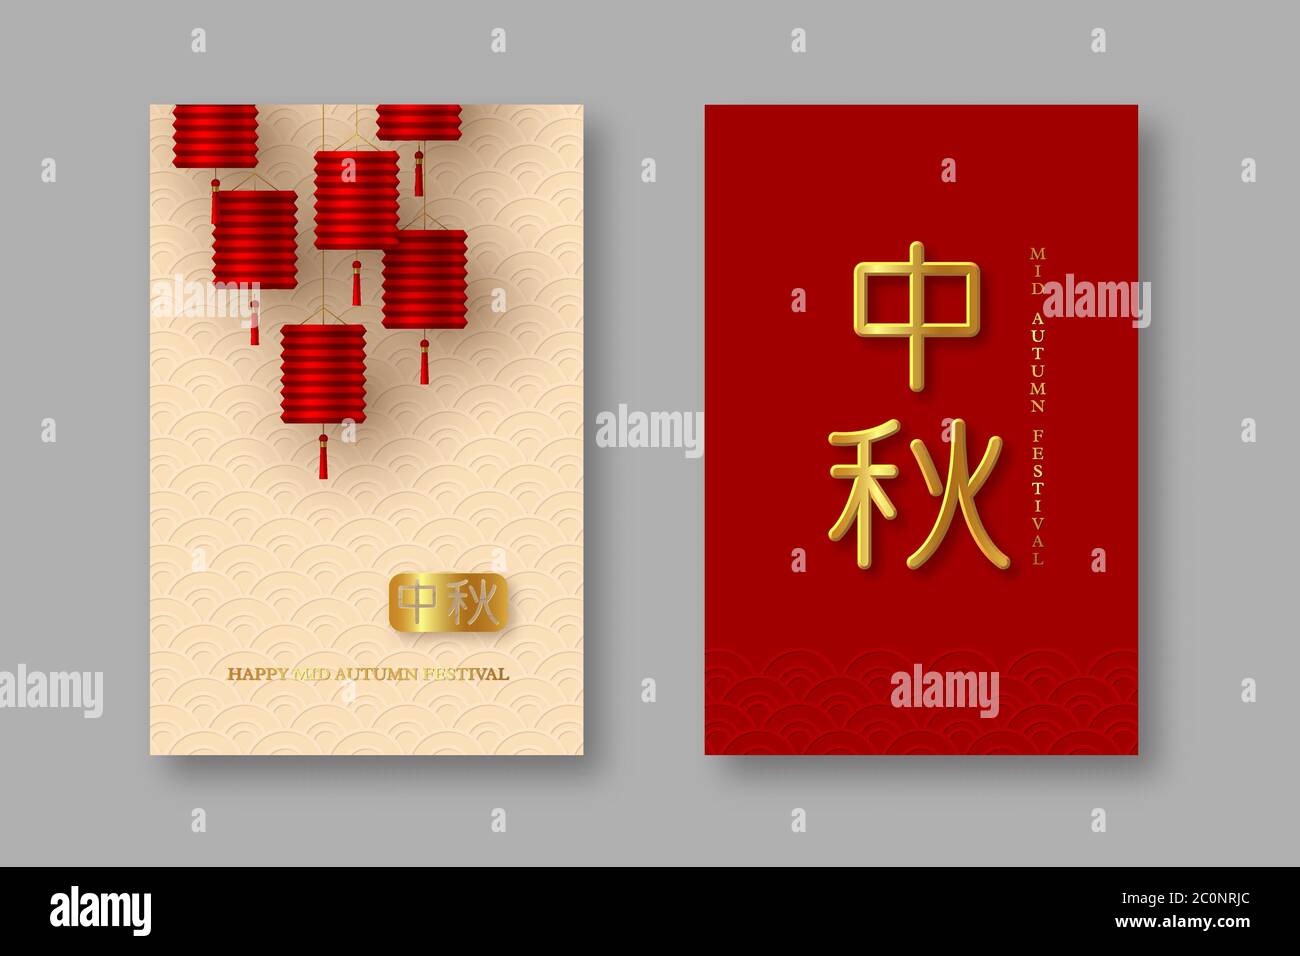 Chinese mid autumn posters. Realistic 3d red lanterns and traditional beige pattern. Chinese golden calligraphy translation - Mid Autumn, vector Stock Vector